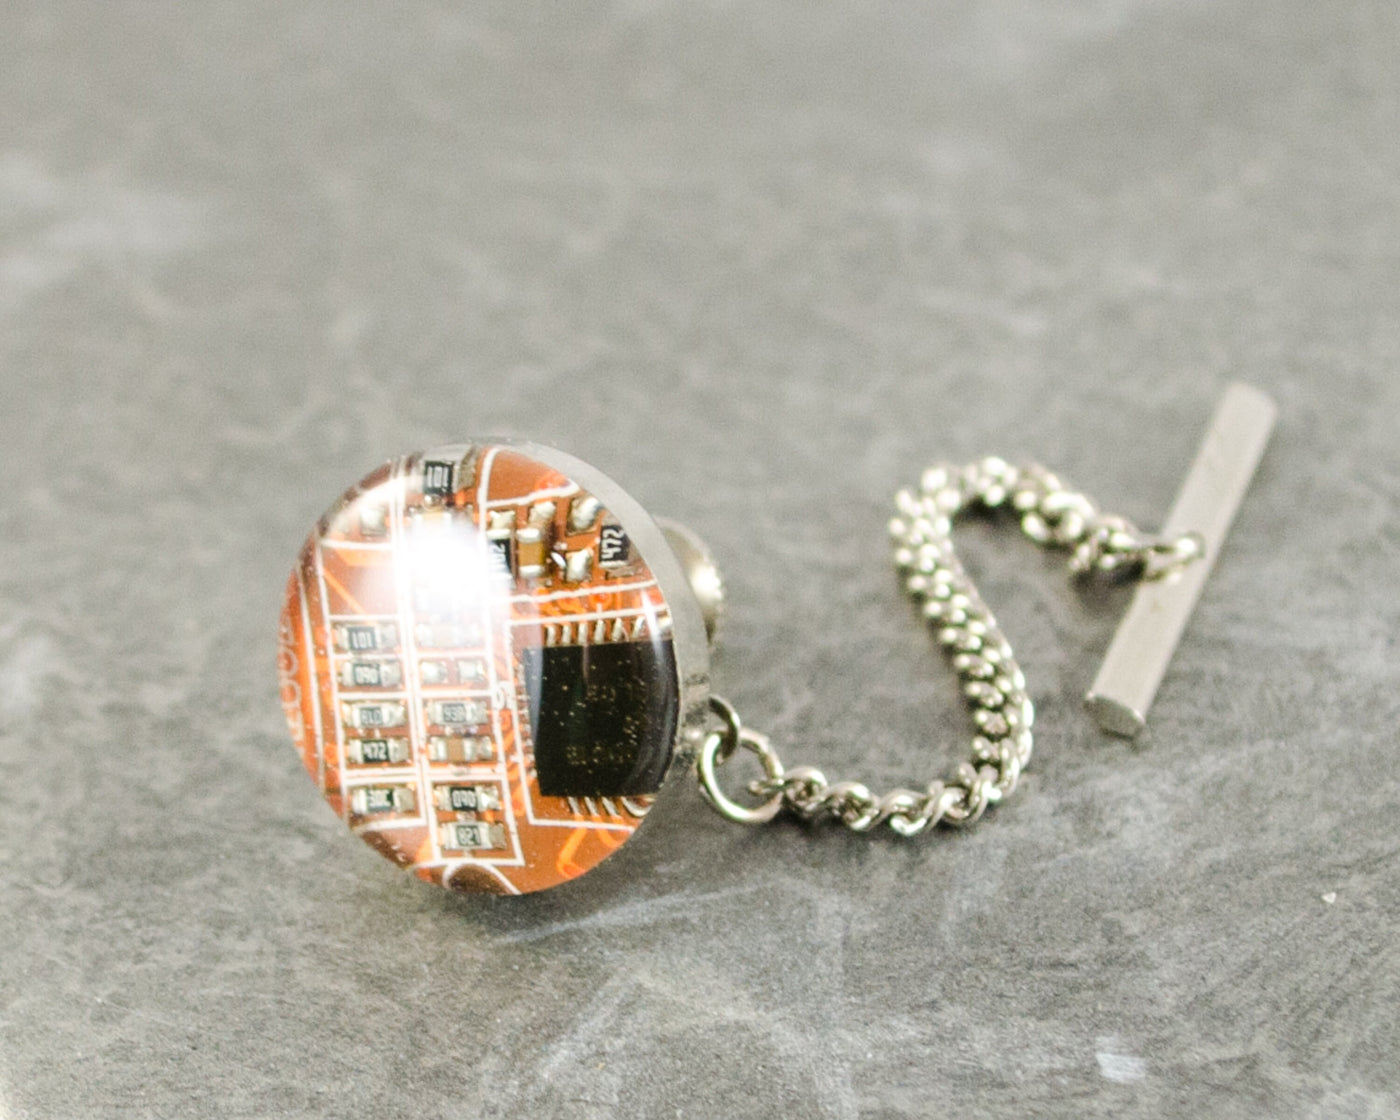 Circuit Board Tie Tack Orange, Computer Jewelry, Gift for Graduate, Father's Day Gift, Wearable Technology, Industrial Chic, Techie Tie Pin